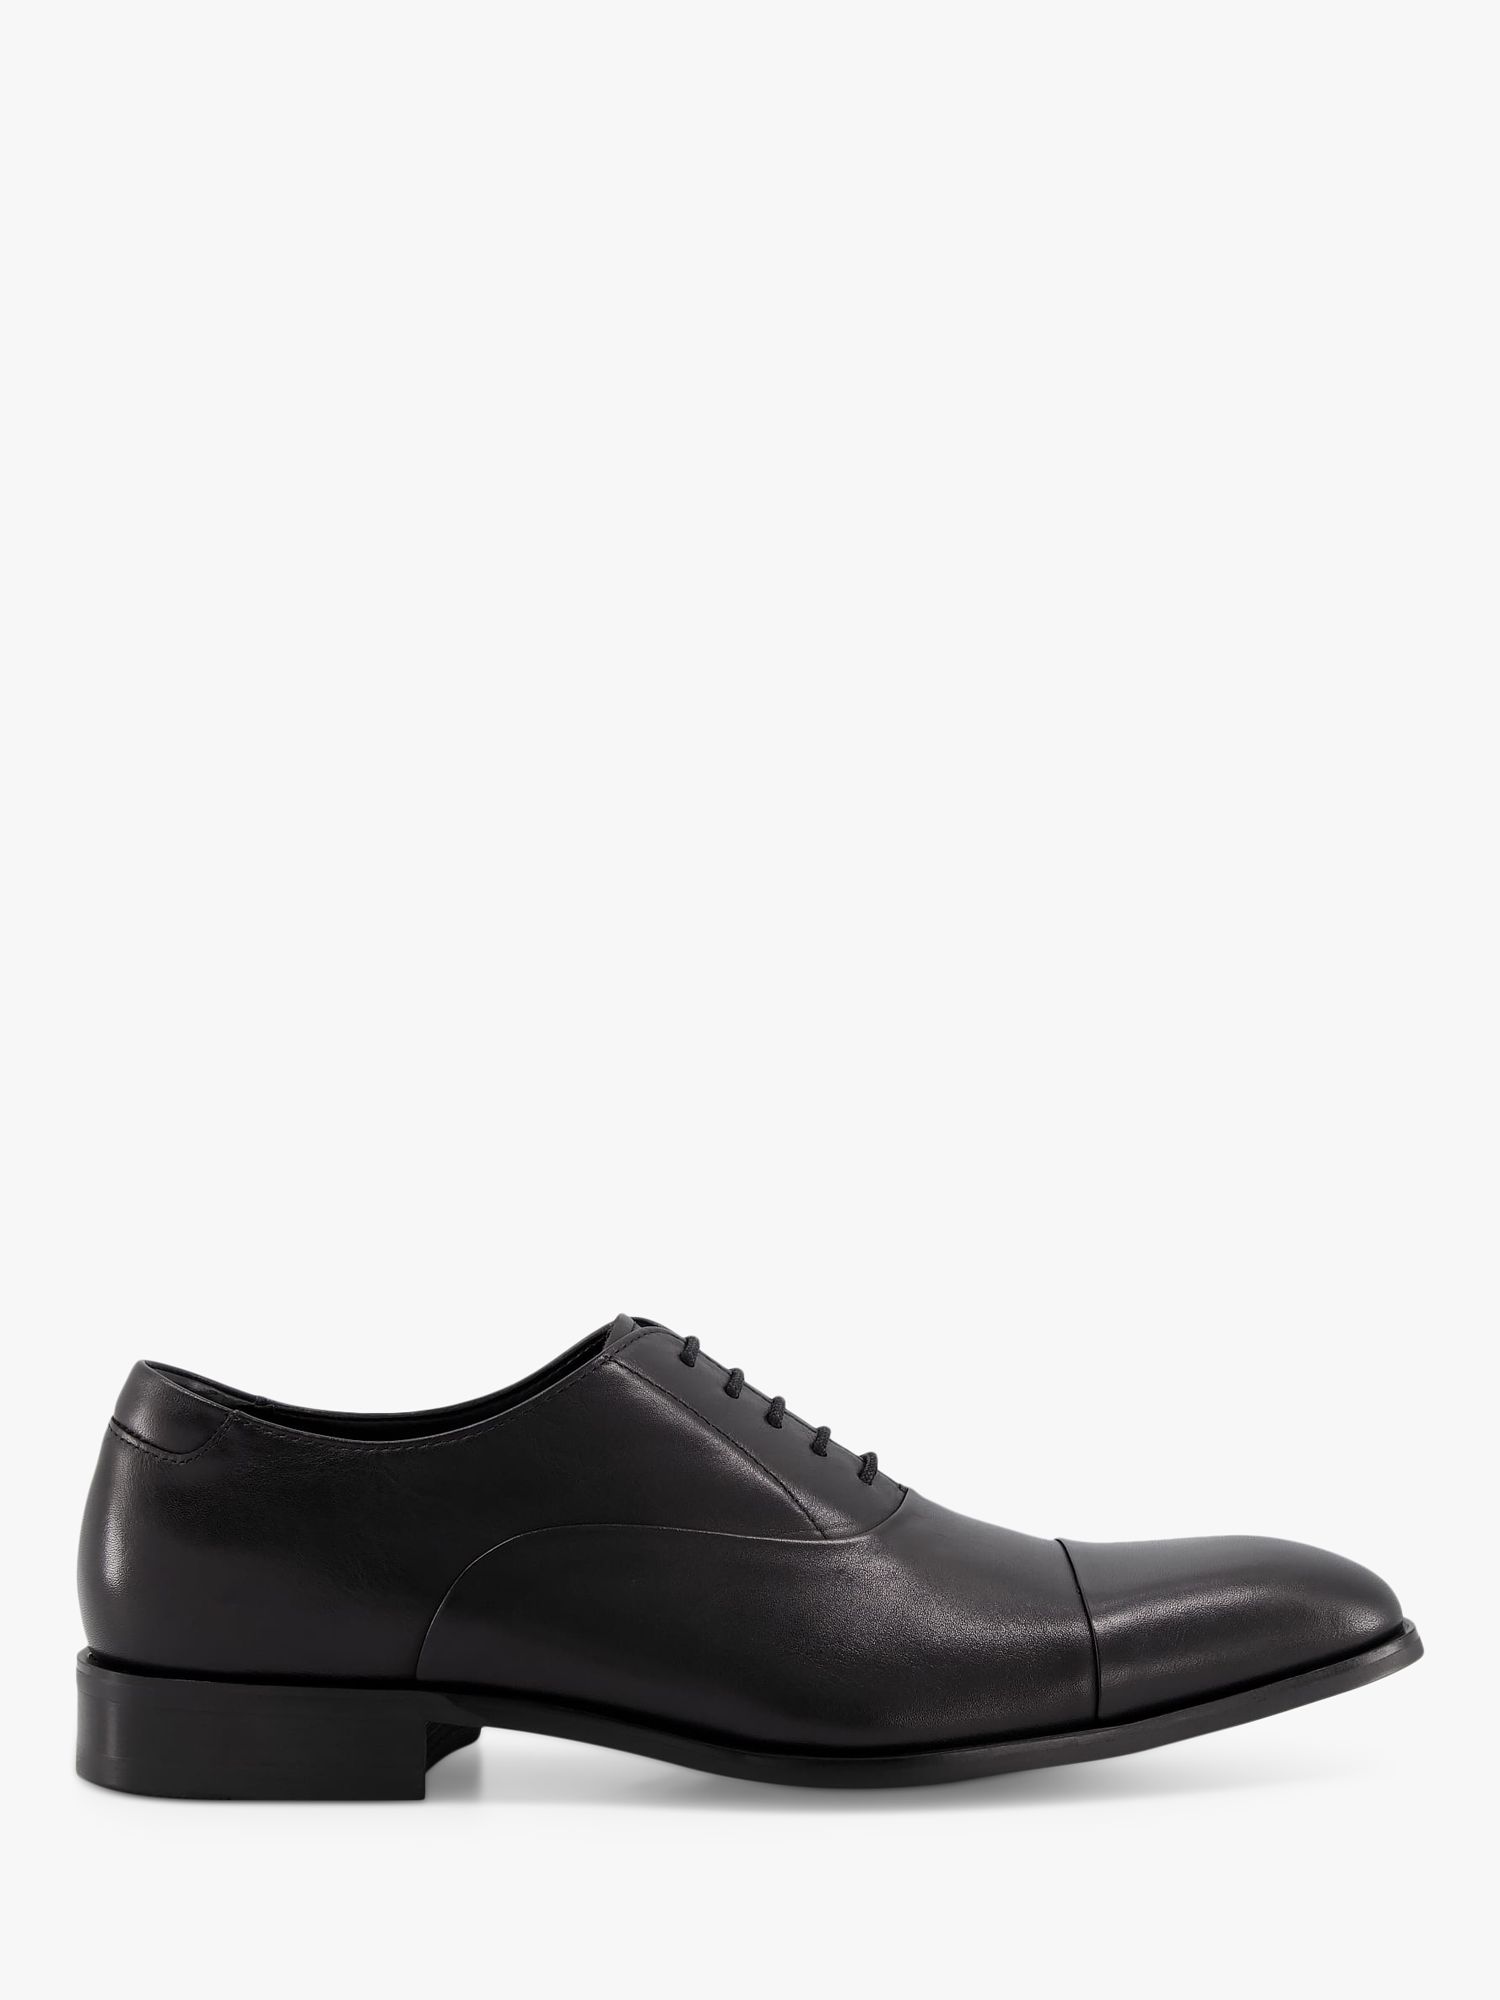 Dune Secrecy Leather Derby Shoes, Black, 7